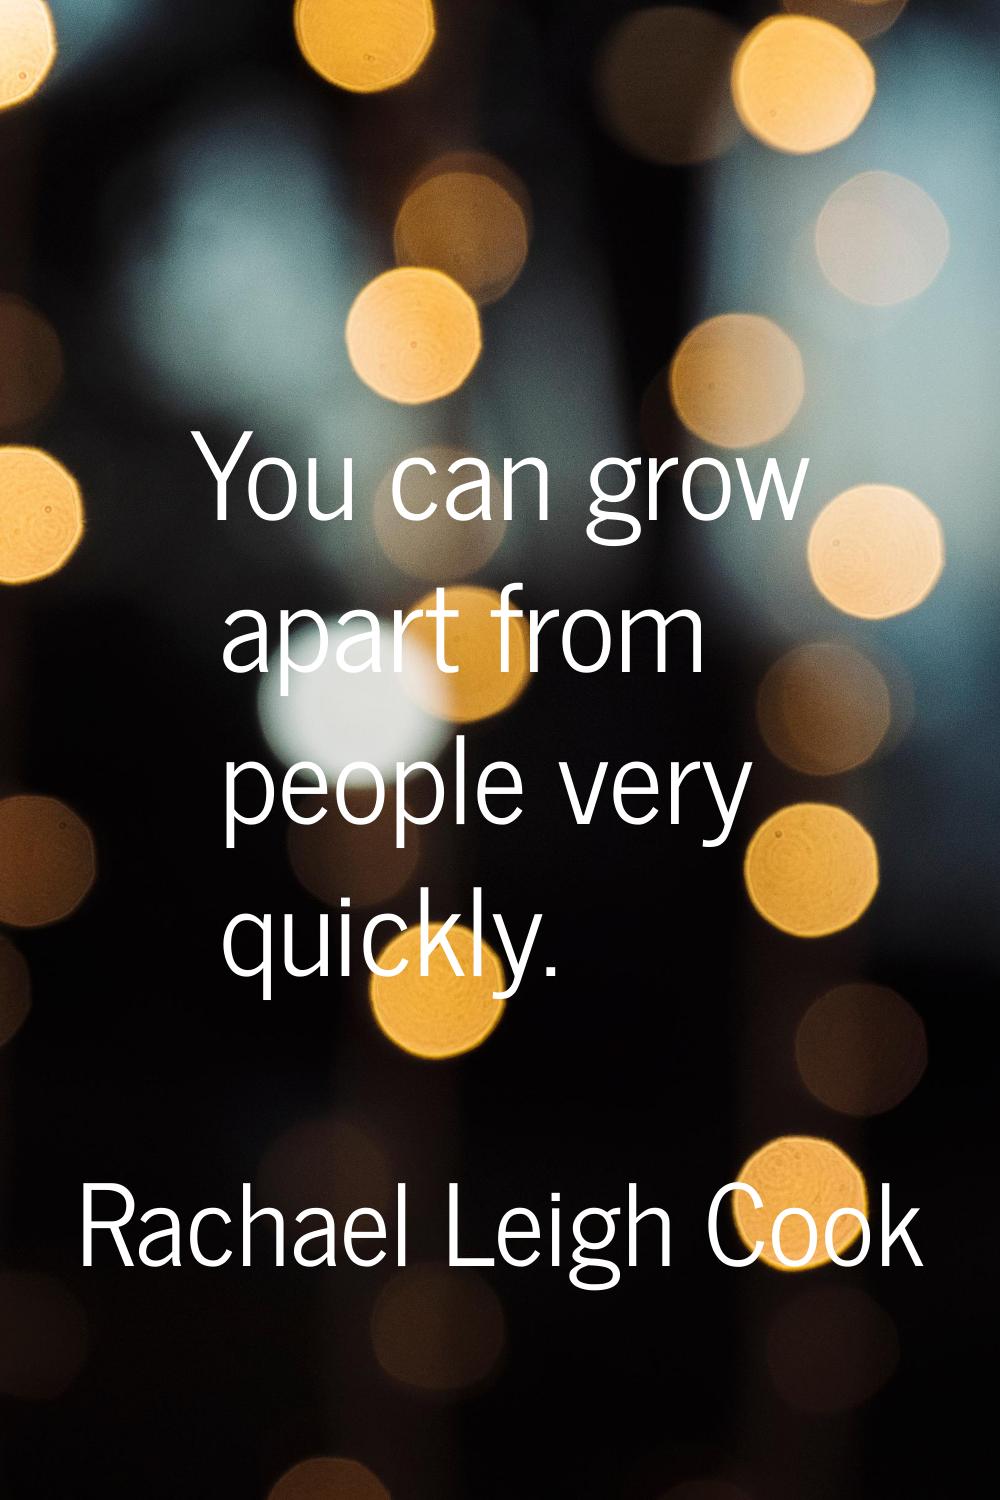 You can grow apart from people very quickly.